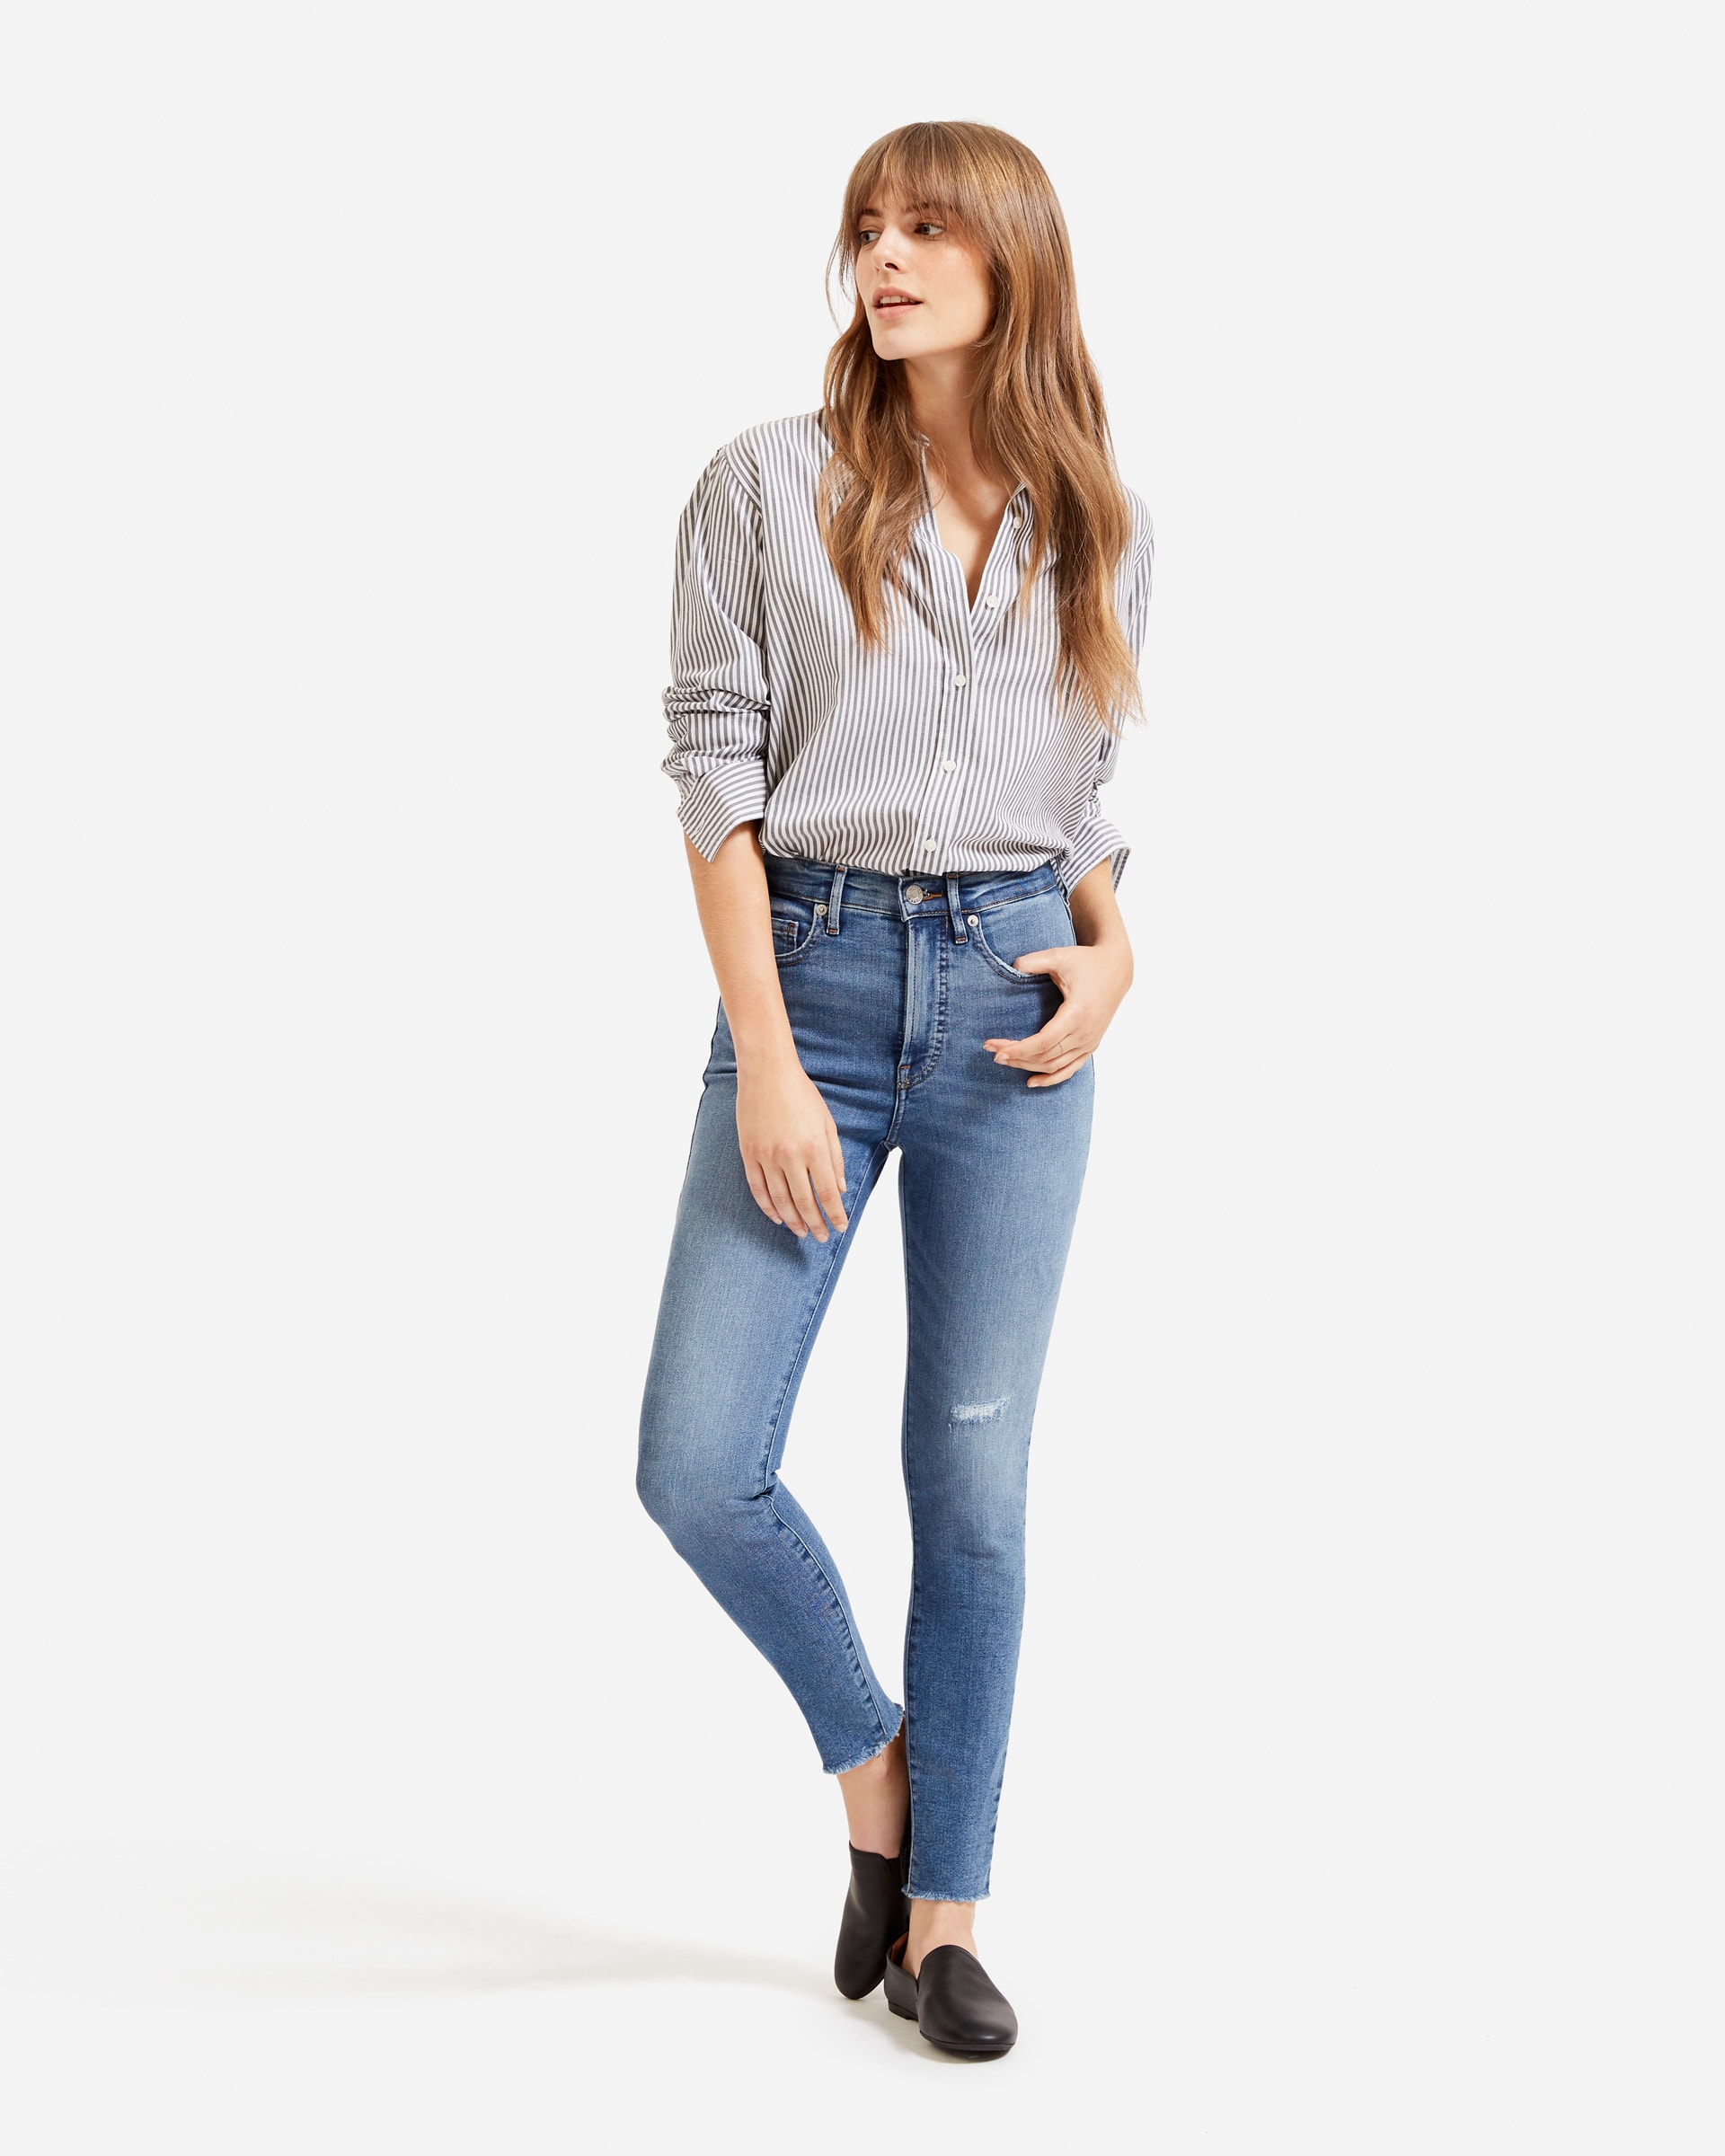 The Authentic Stretch High-Rise Skinny Distressed Mid Blue – Everlane